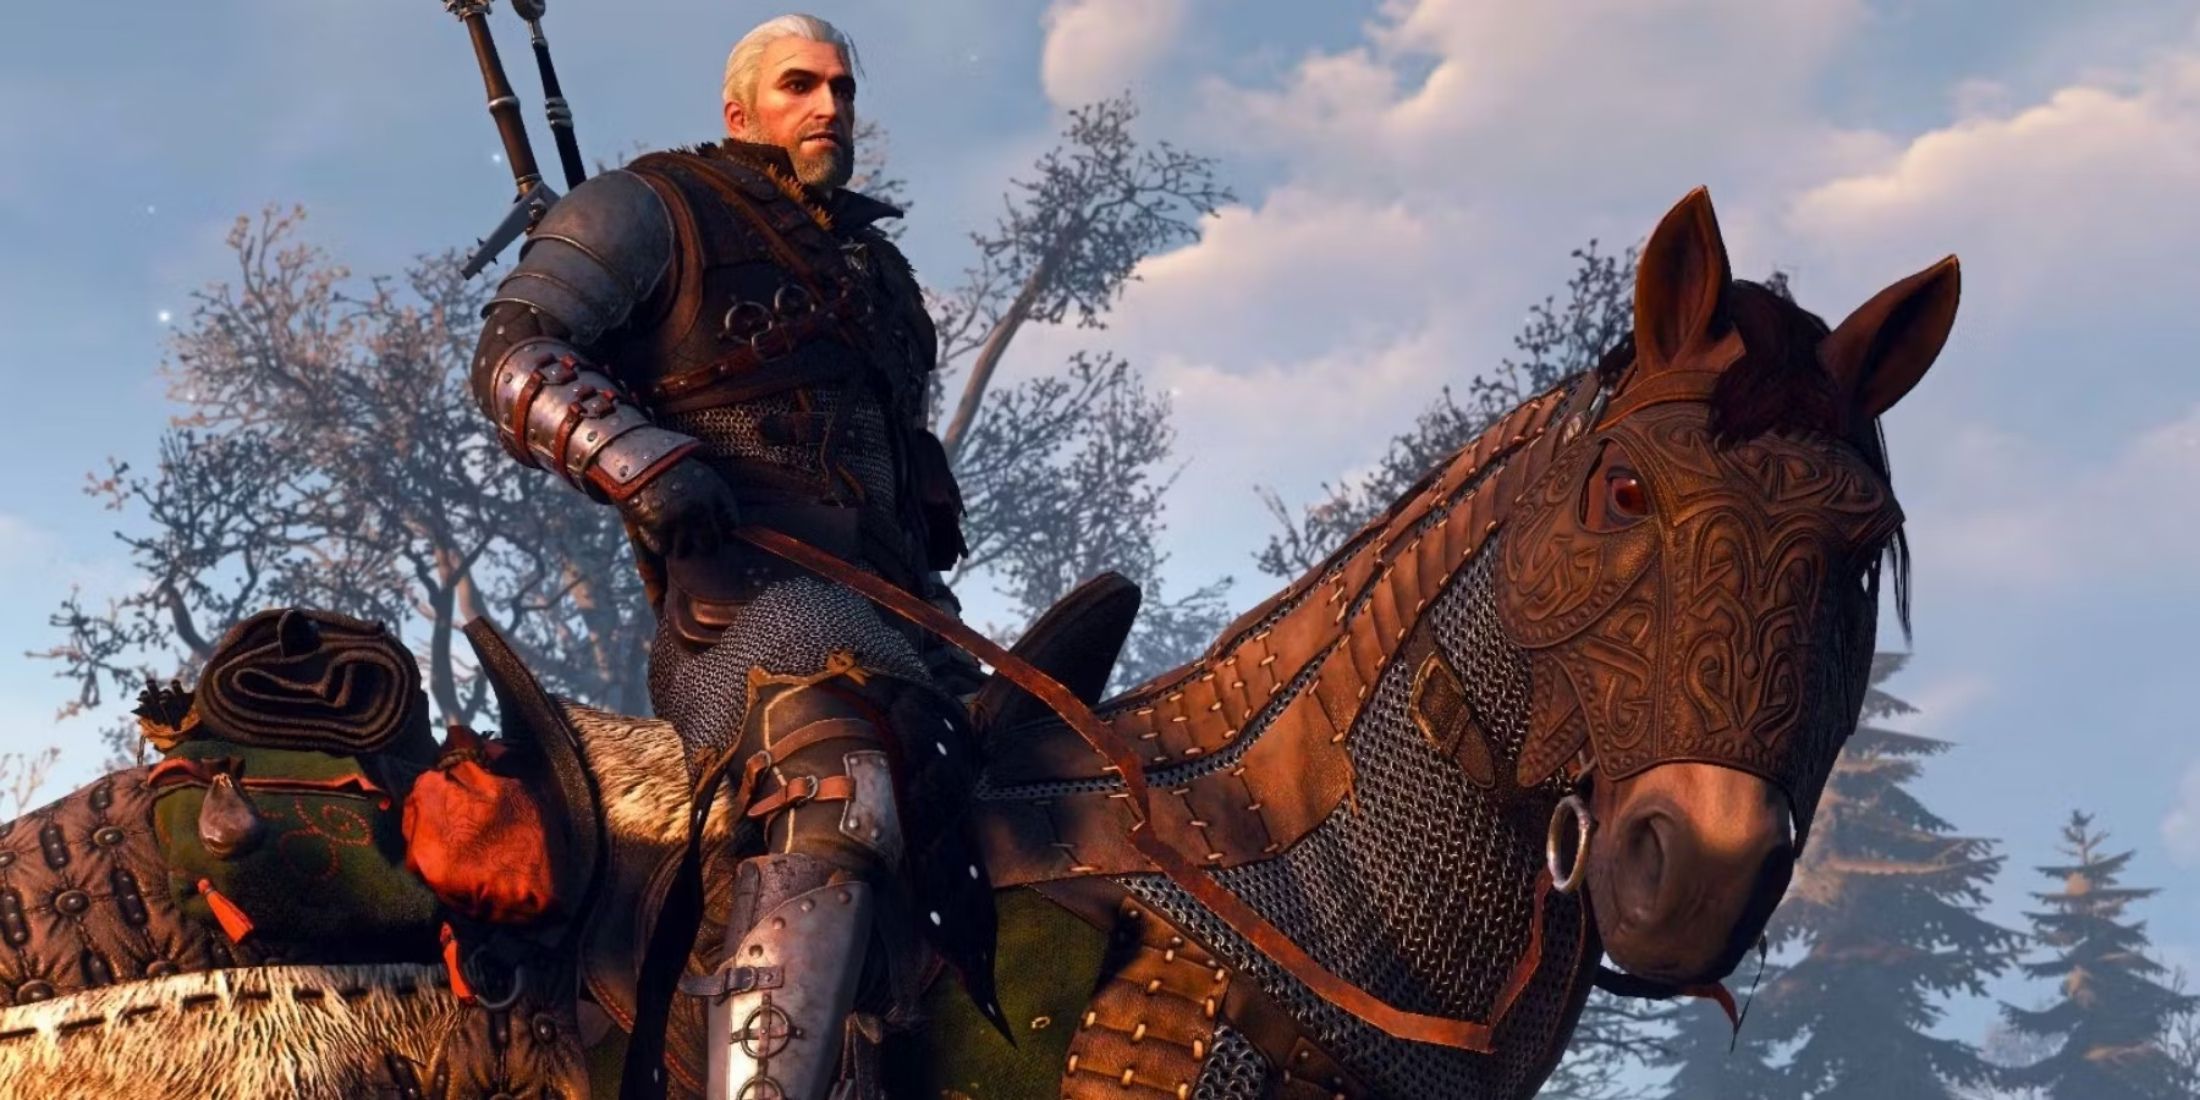 Geralt riding his horse, Roach, in The Witcher 3